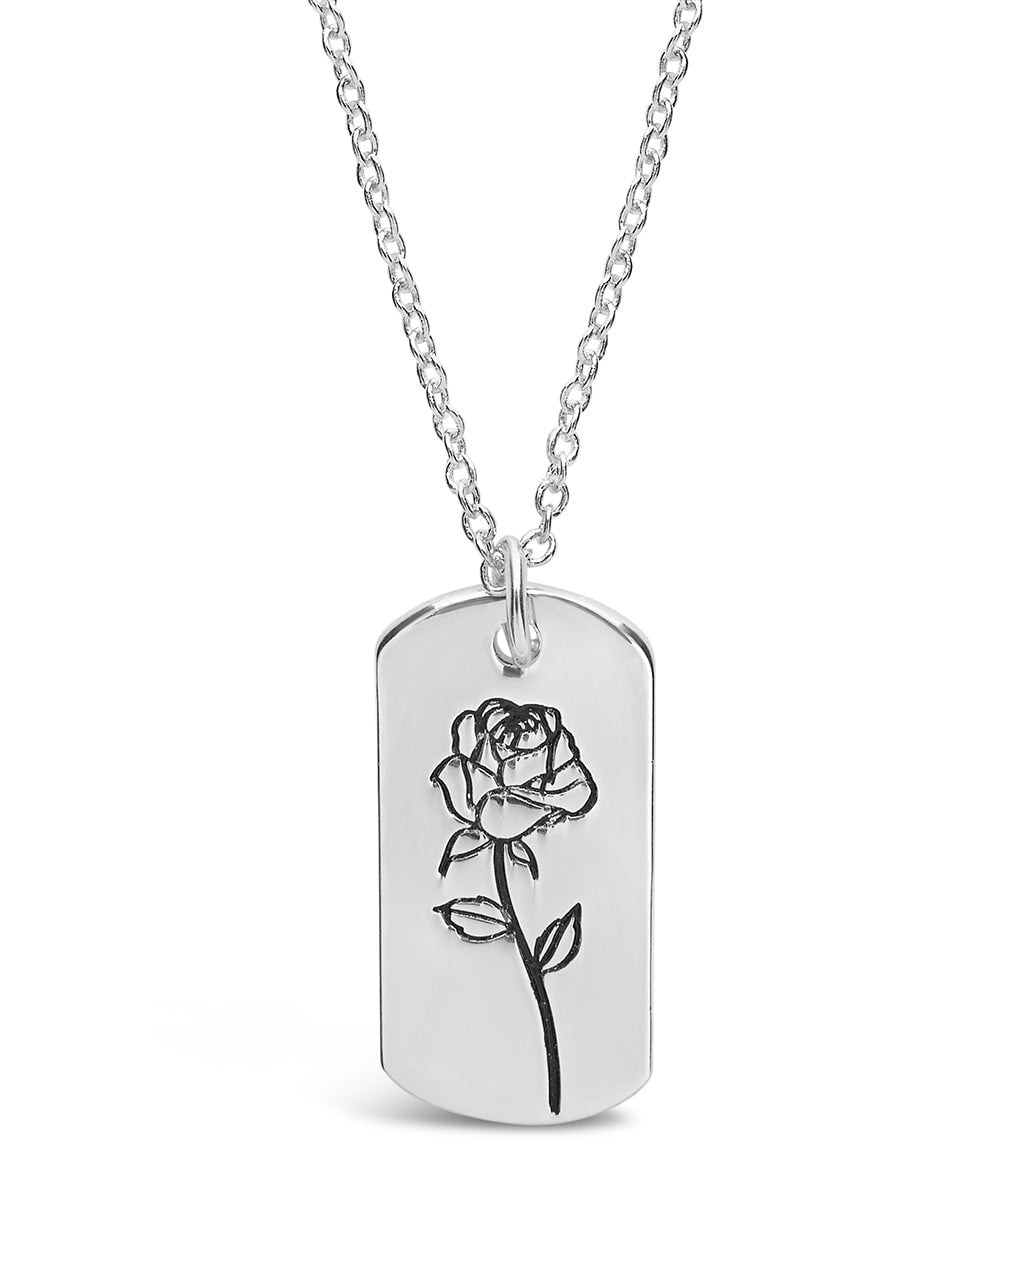 Summer Rose Necklace in Sterling Silver - Hello Halsted